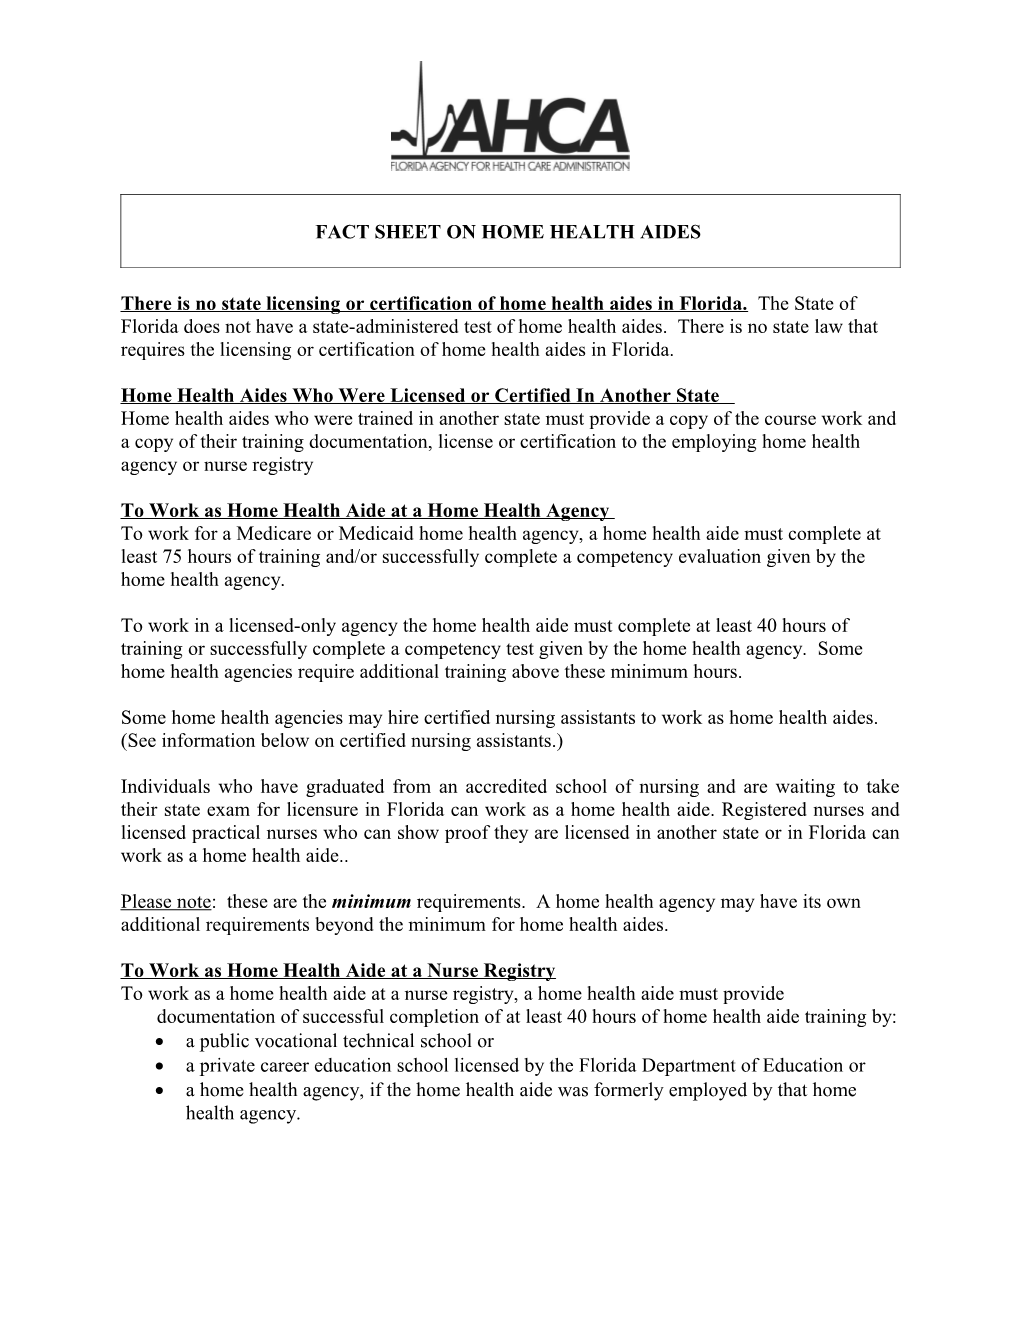 Fact Sheet on Home Health Aides